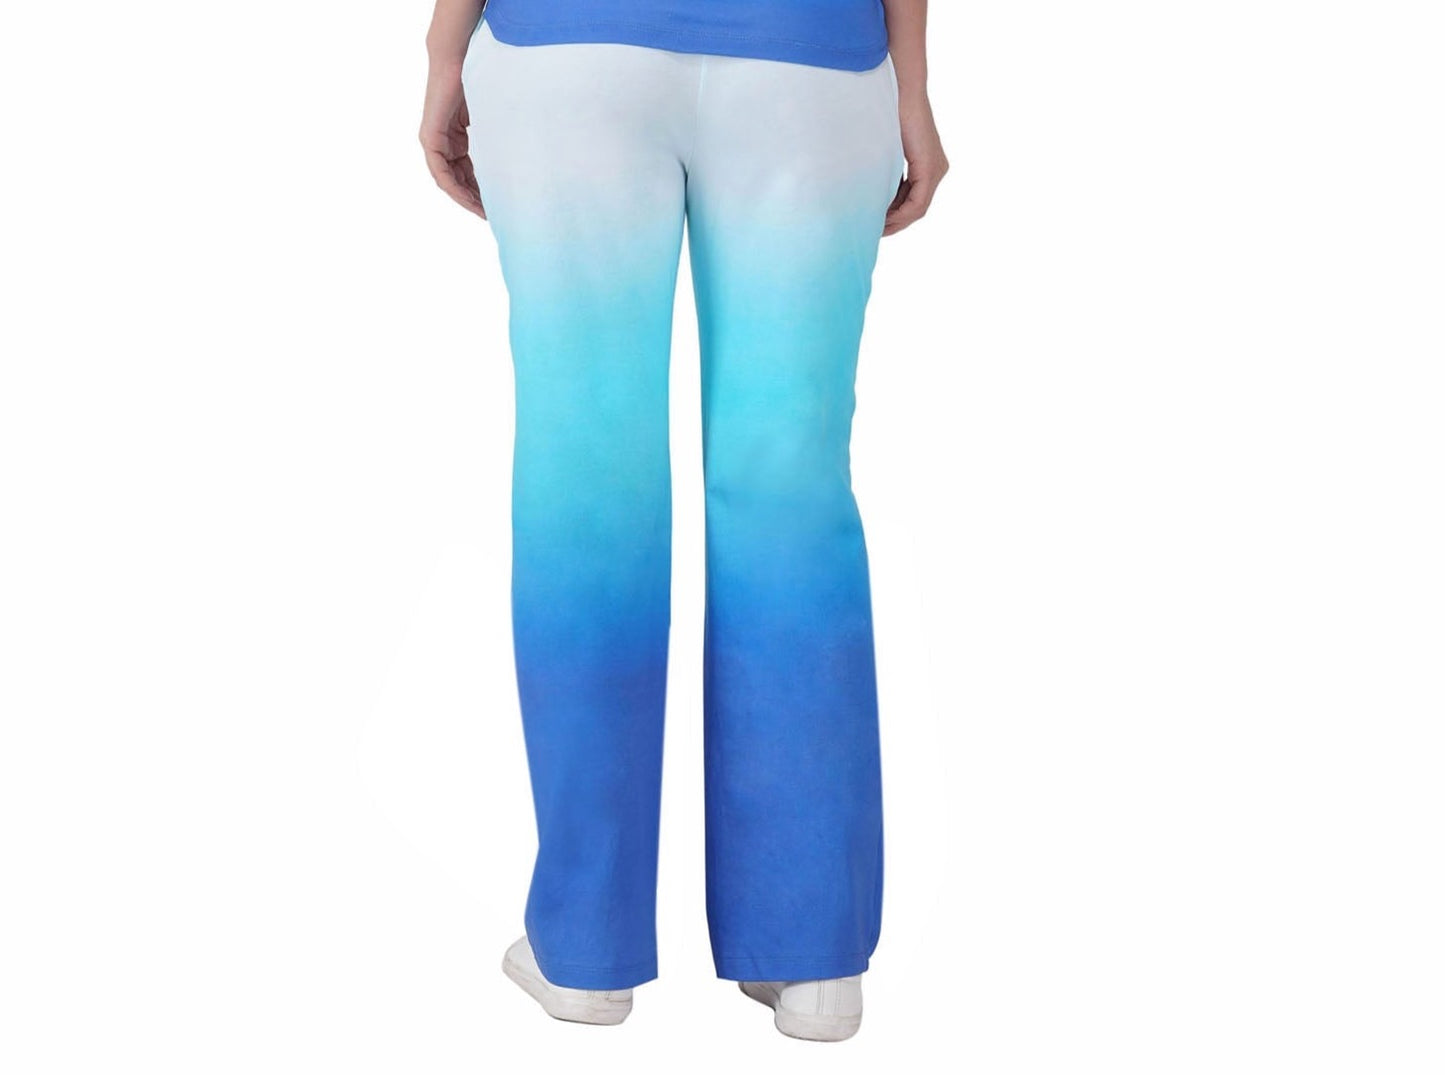 SLAY. Women's White to Blue Ombre Pants